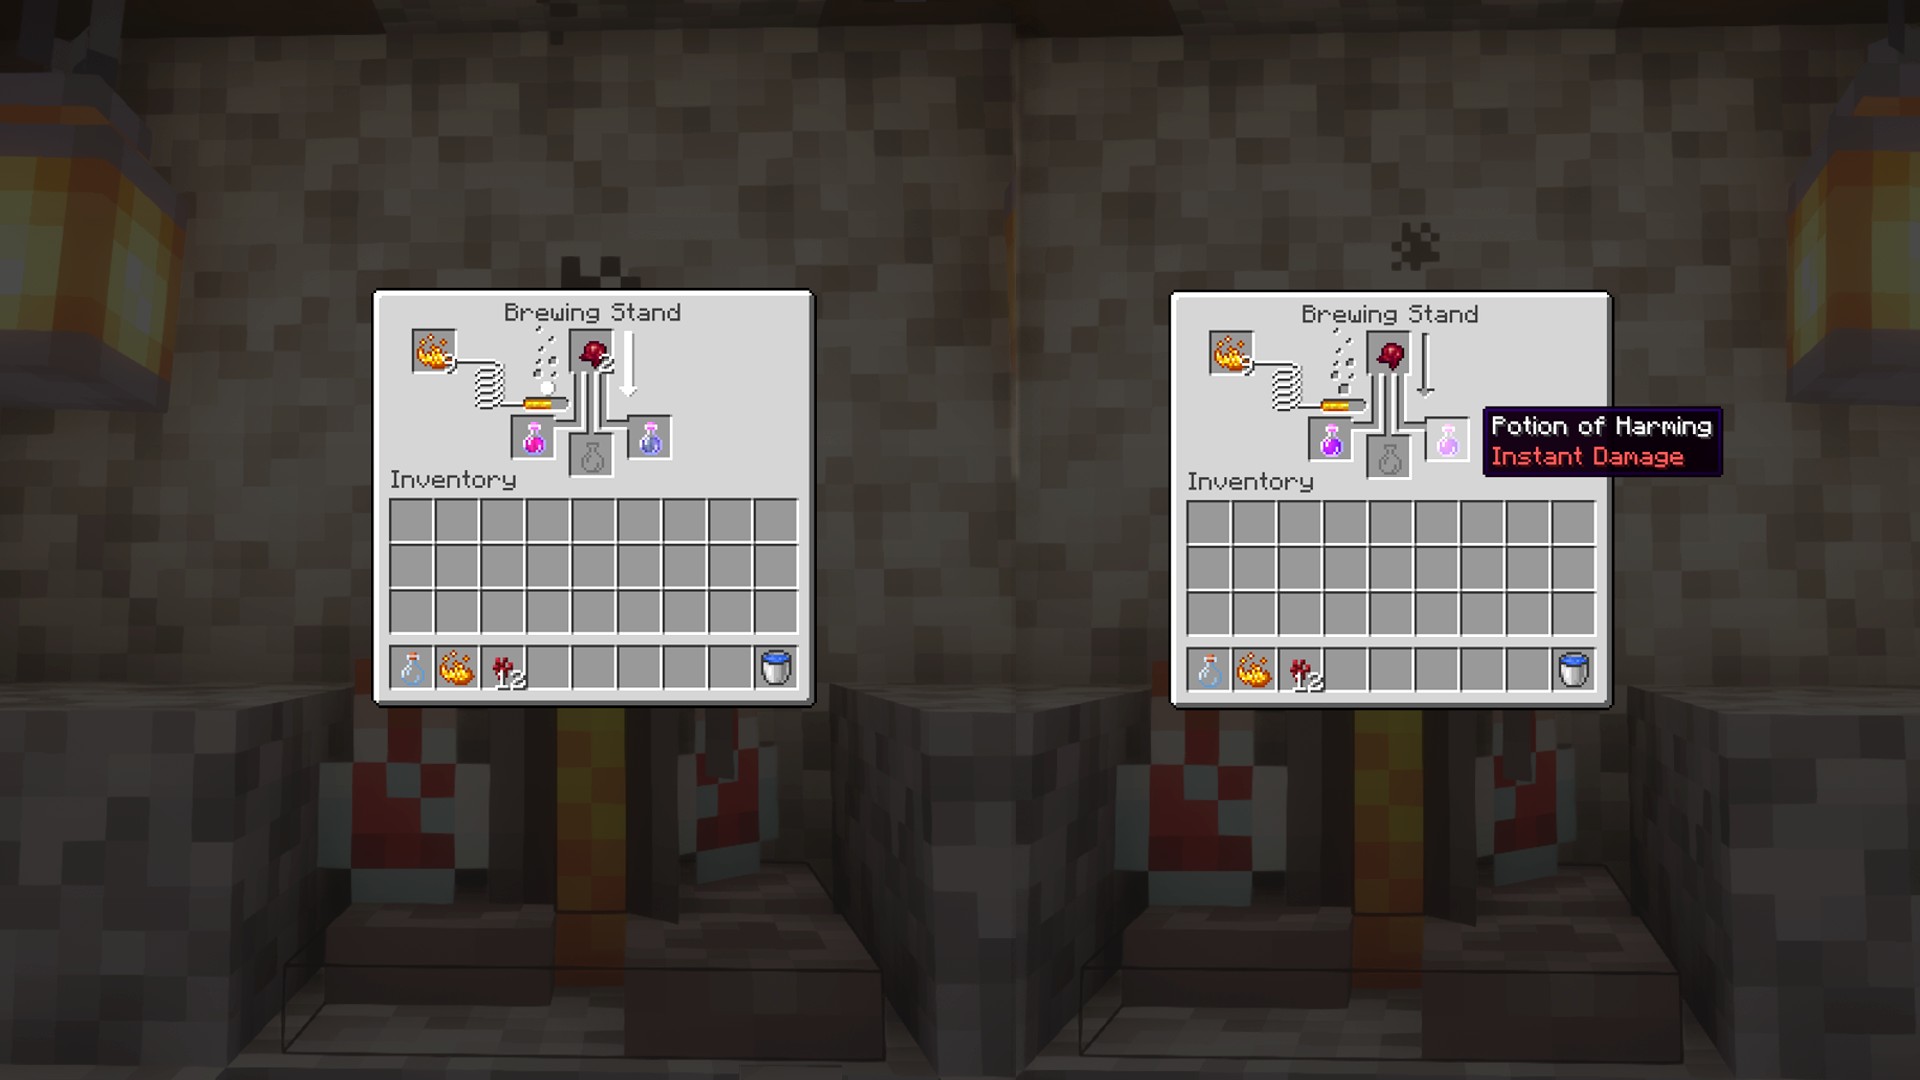 Minecraft potions recipes: the water breathing potion brewing recipe, with a pufferfish in the top slot of the brewing stand interface.